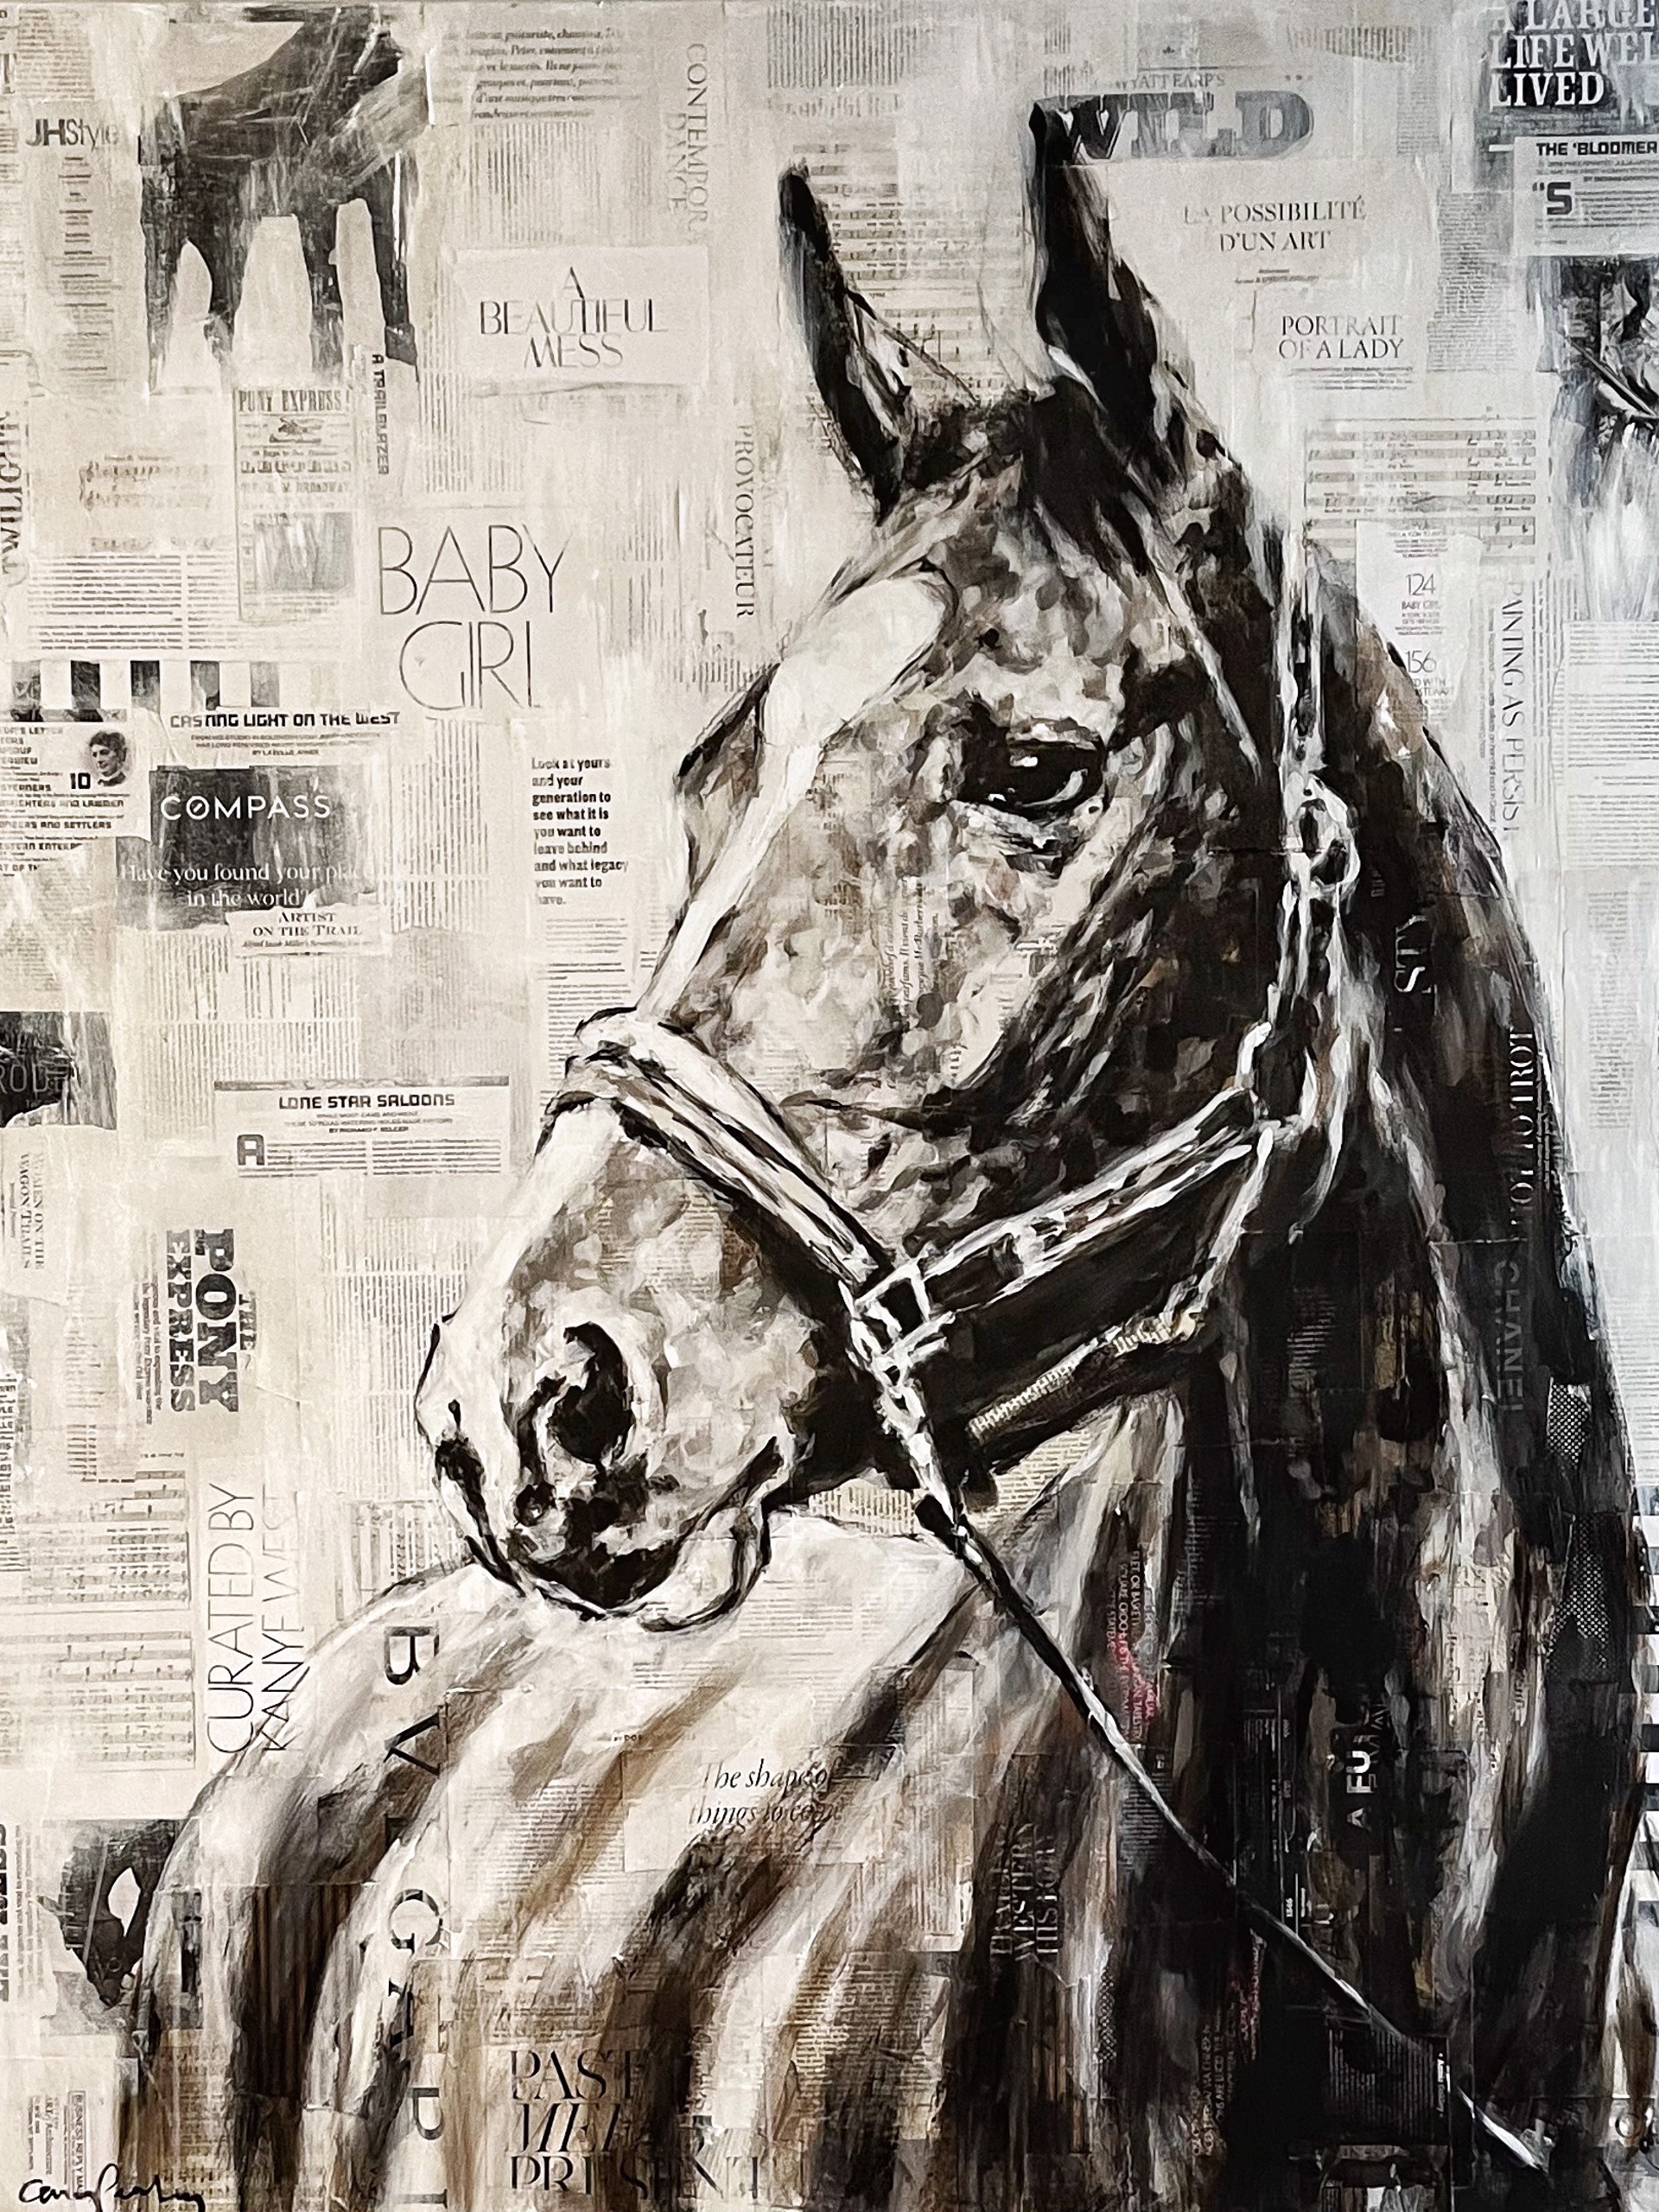 Horse In Halter On Collaged Printed Paper With Acrylic, Monochromatic by Carrie Penley At Gallery Wild